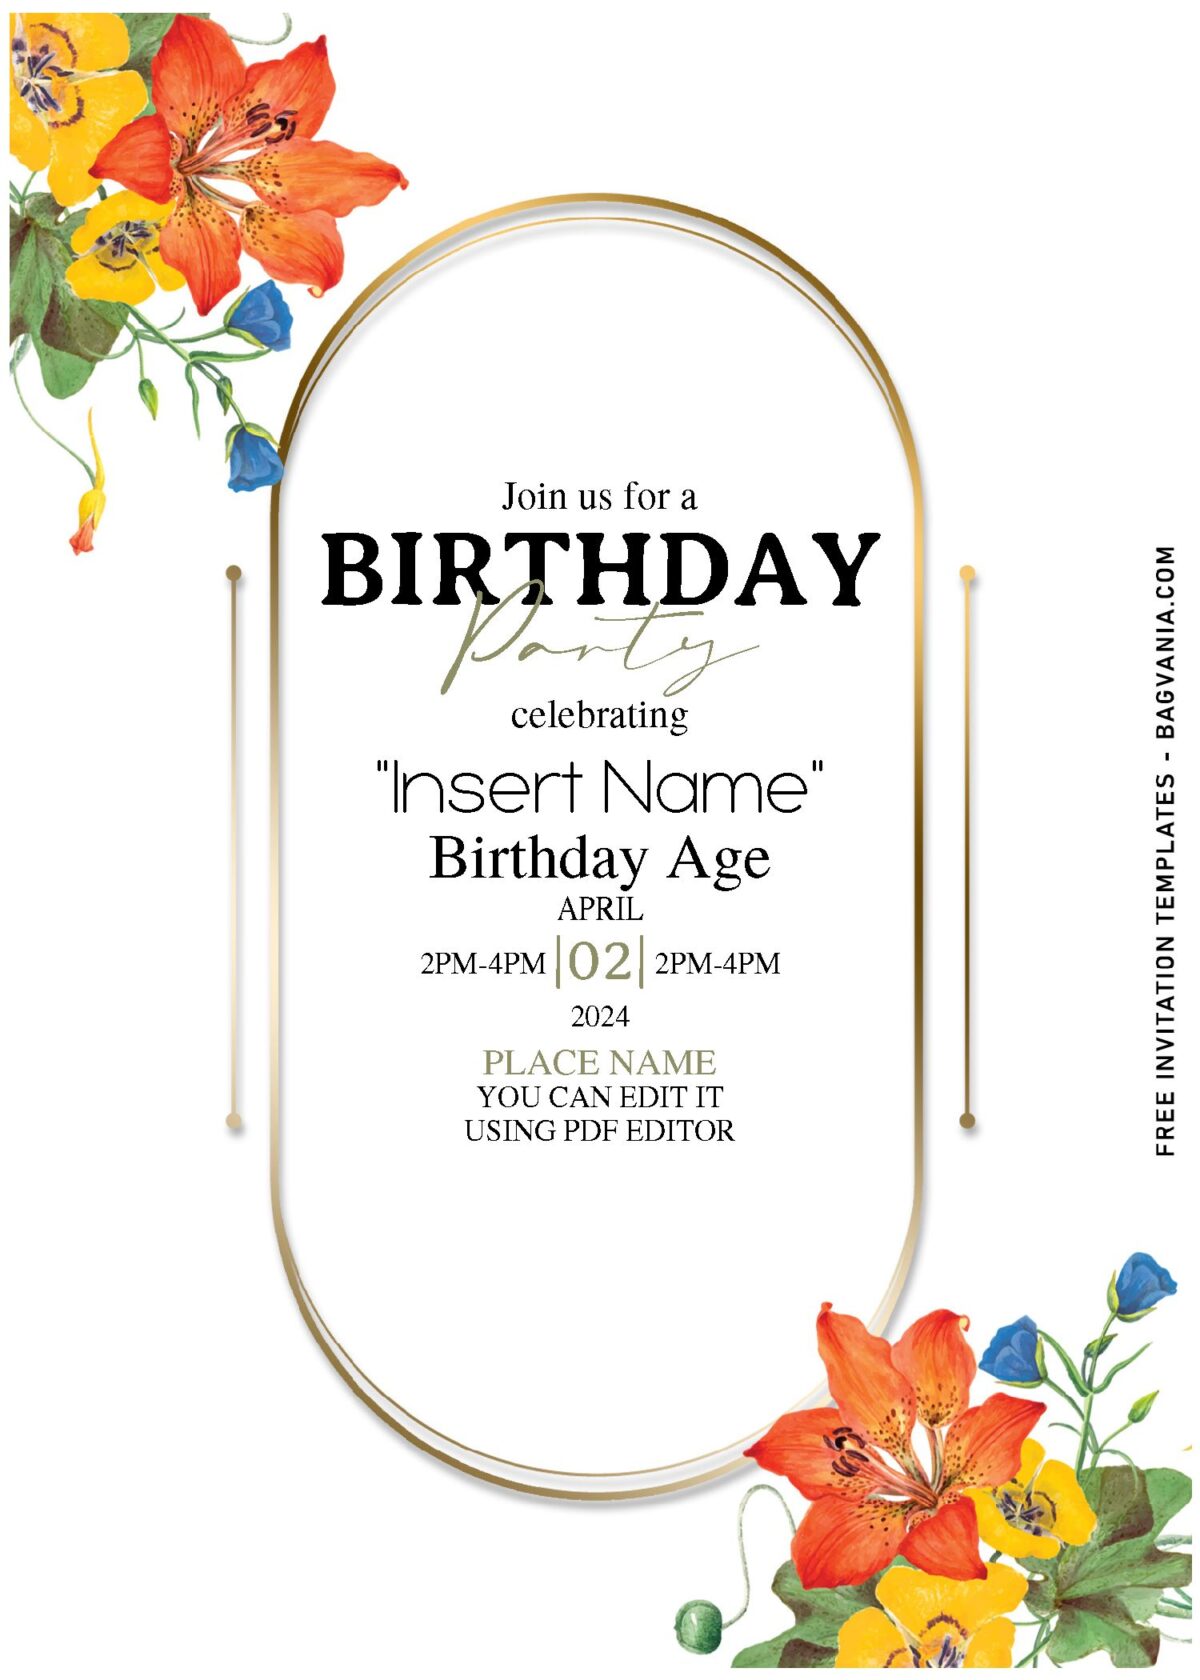 (Free Editable PDF) Whimsical Spring Birthday Invitation Templates with colorful lily